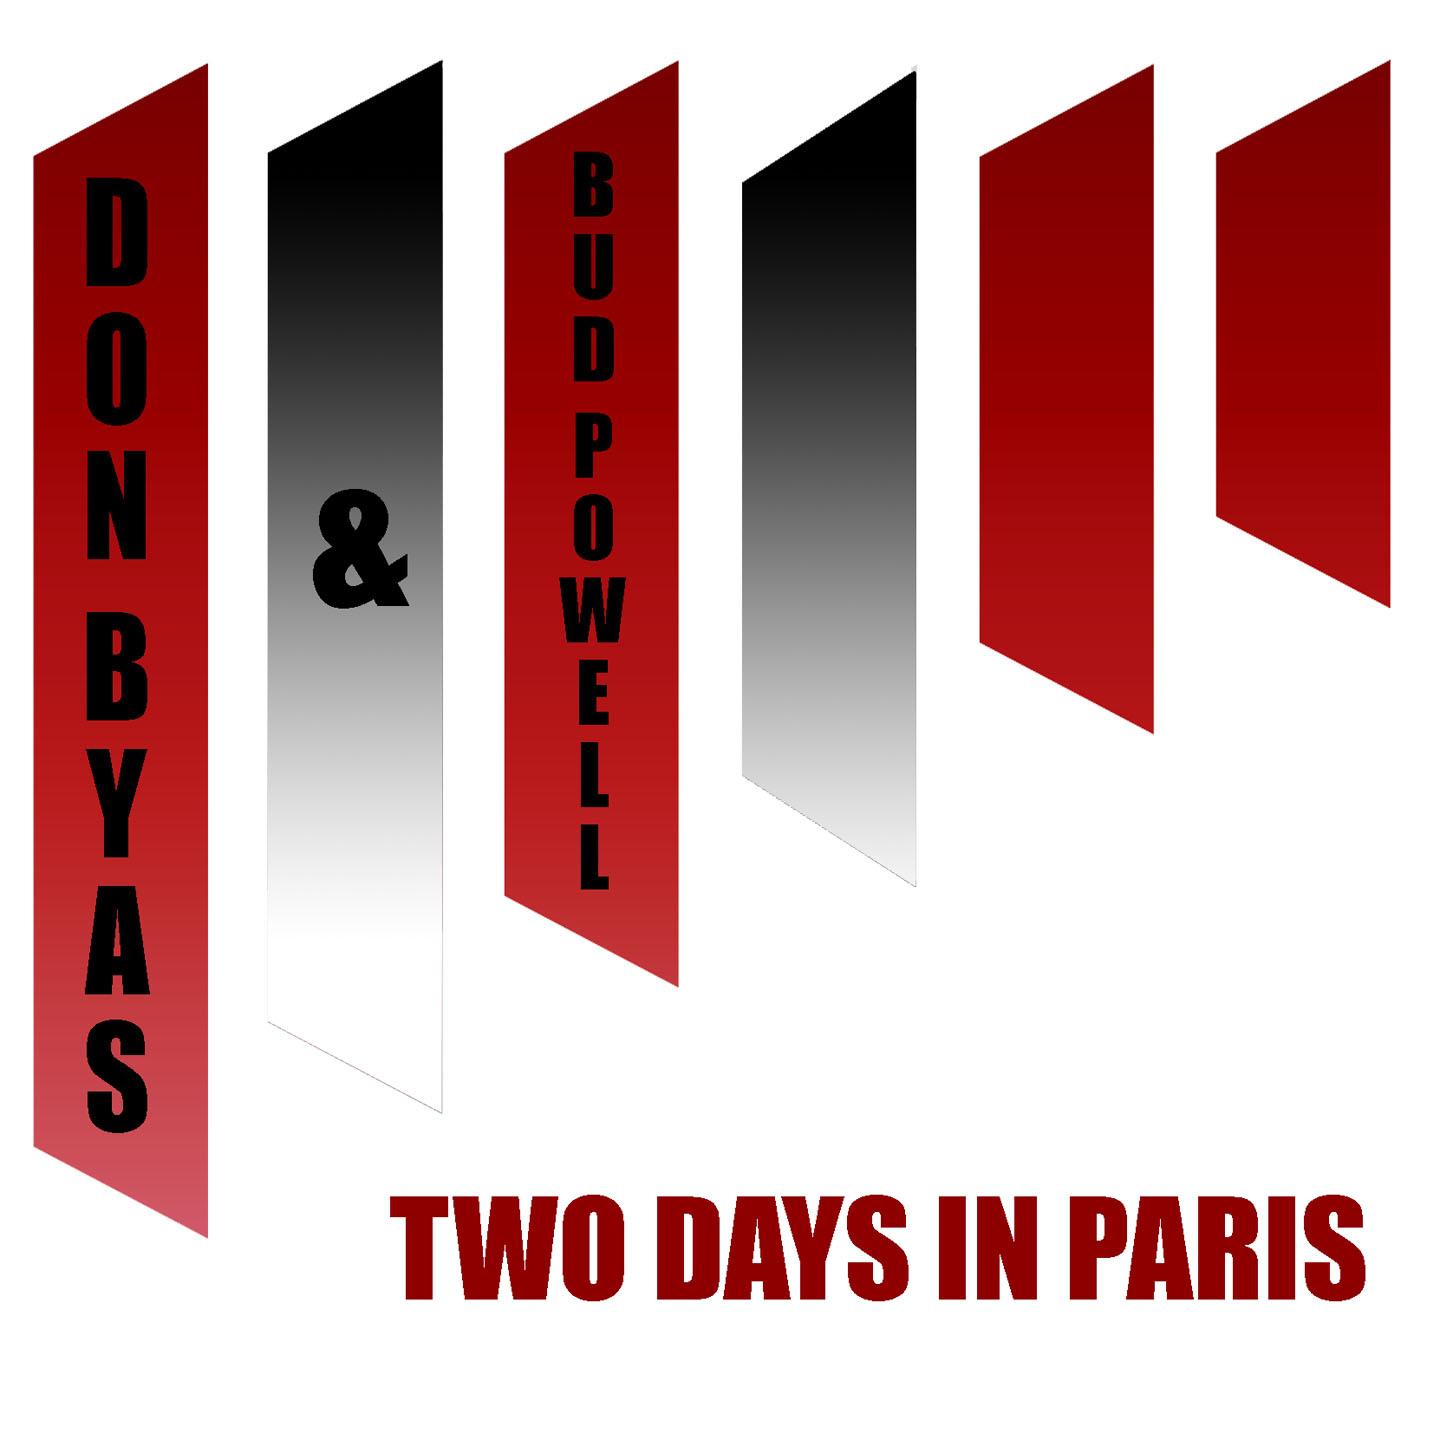 Don Byas & Bud Powell: Two Days in Paris